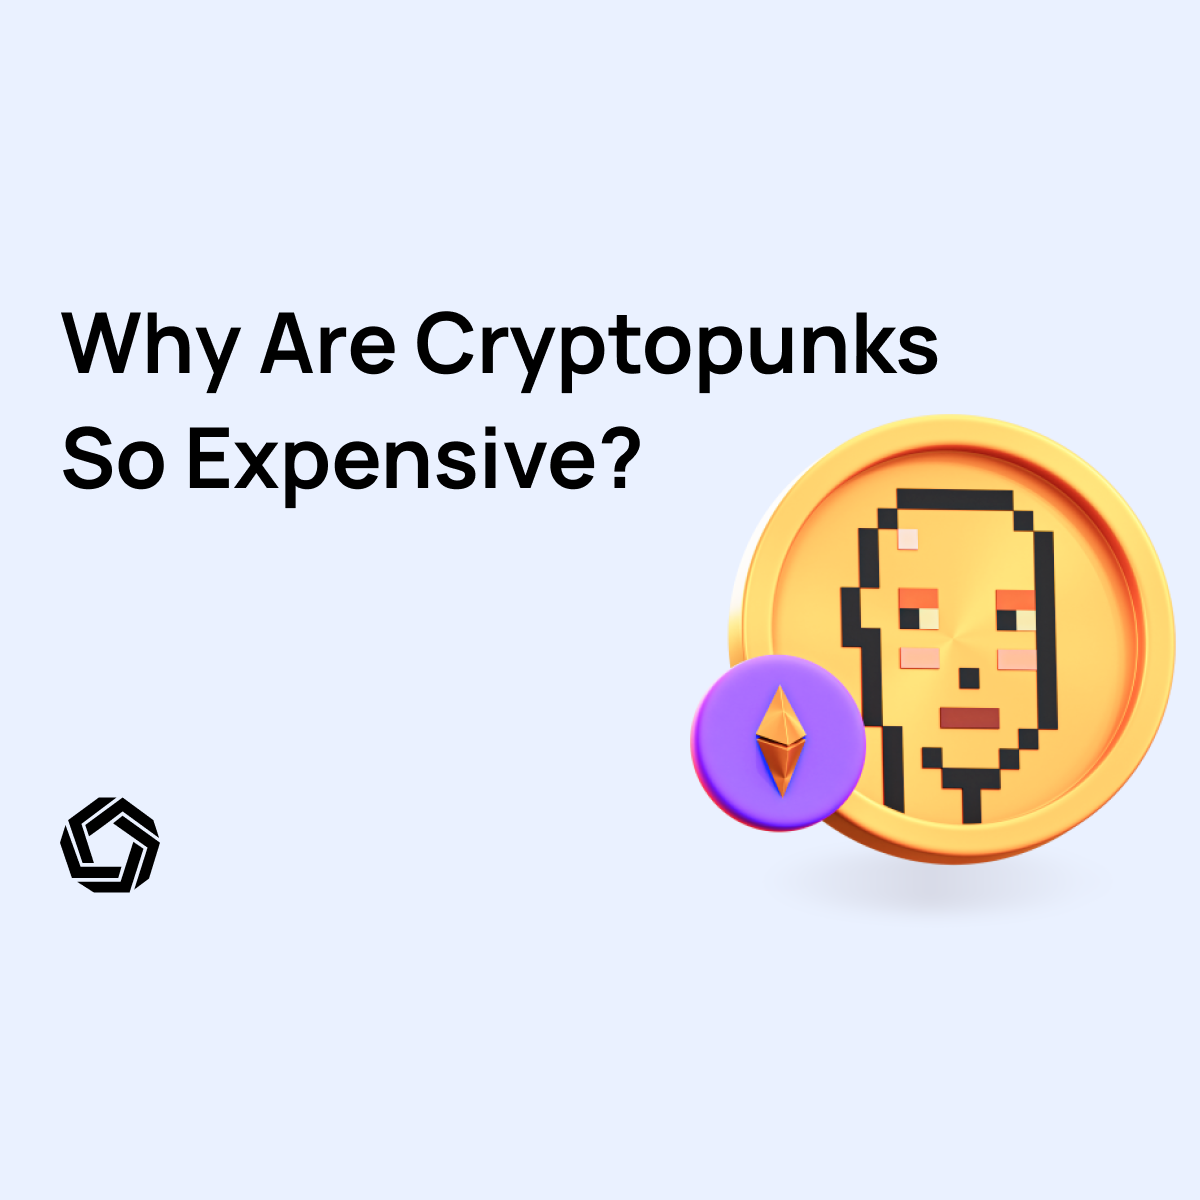 Why are Cryptopunks so expensive?